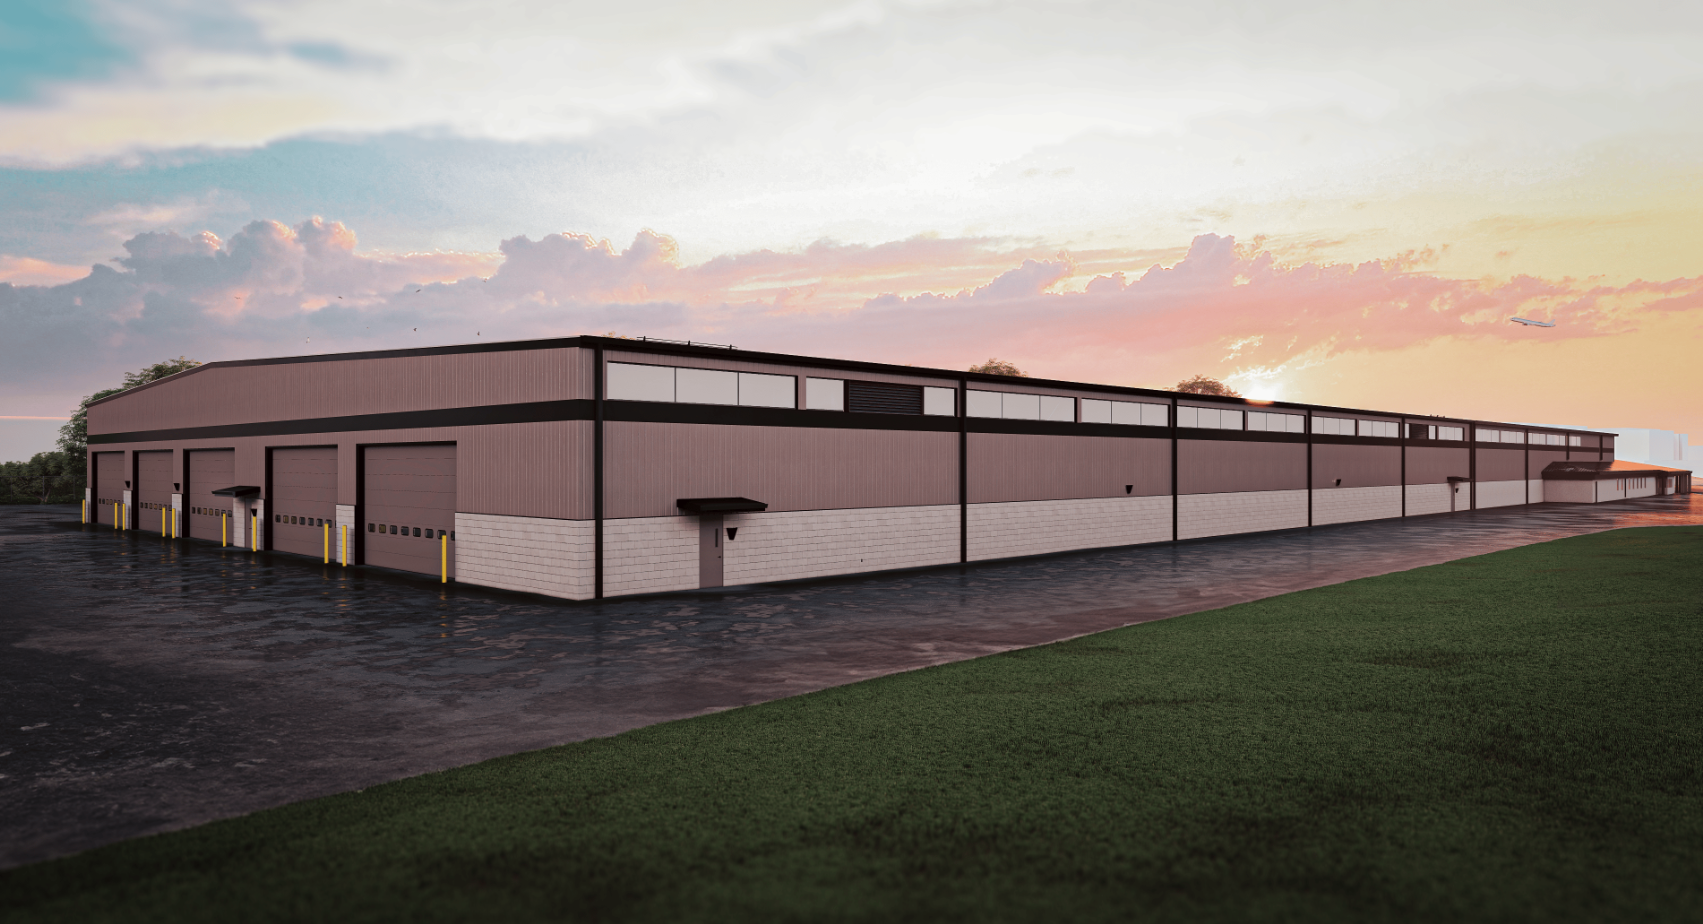 A rendering of the future Snow Removal Equipment Building